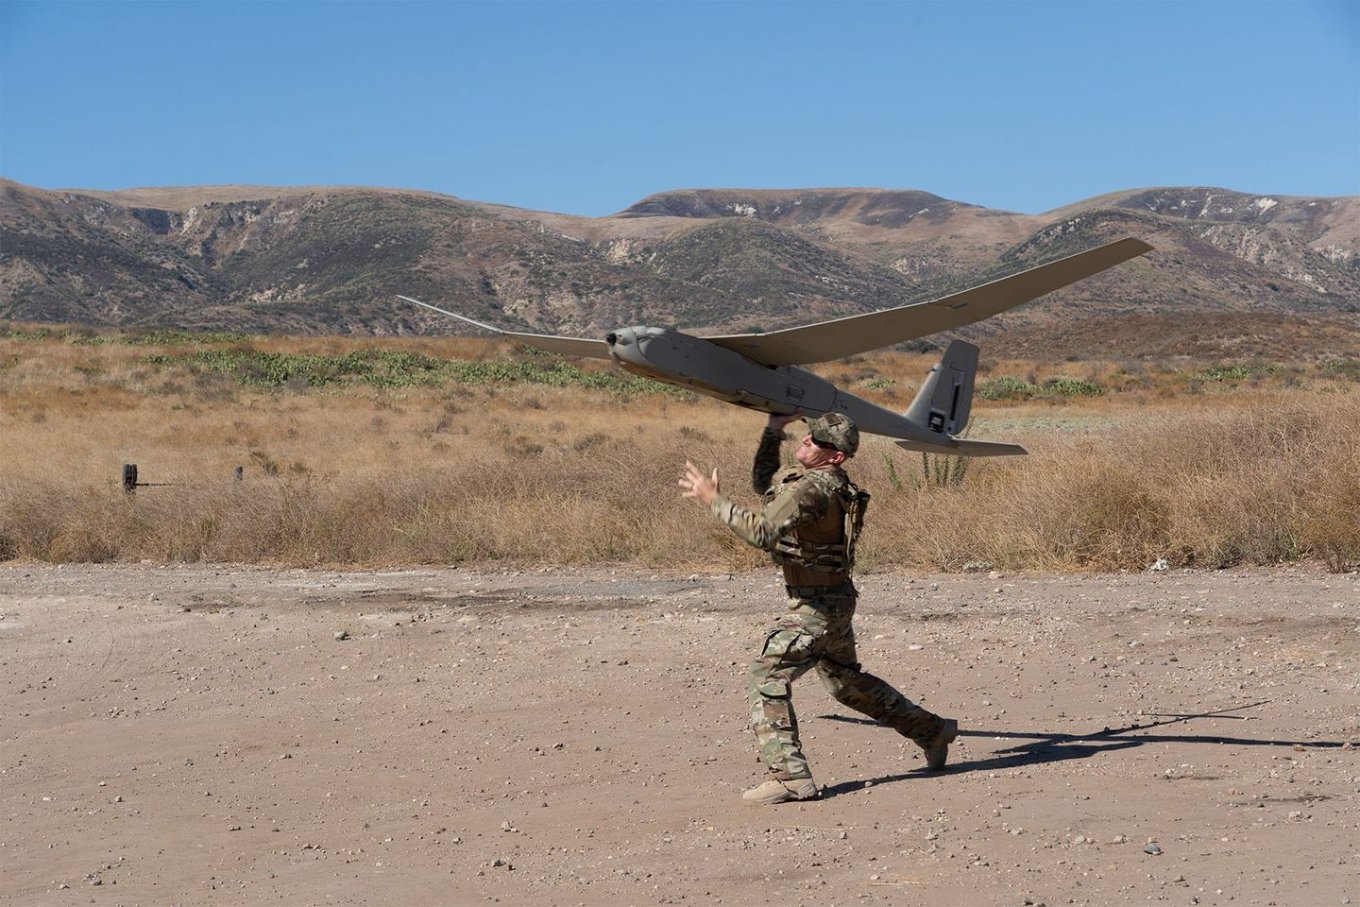 Puma LE Unmanned Aerial System, Defense Express